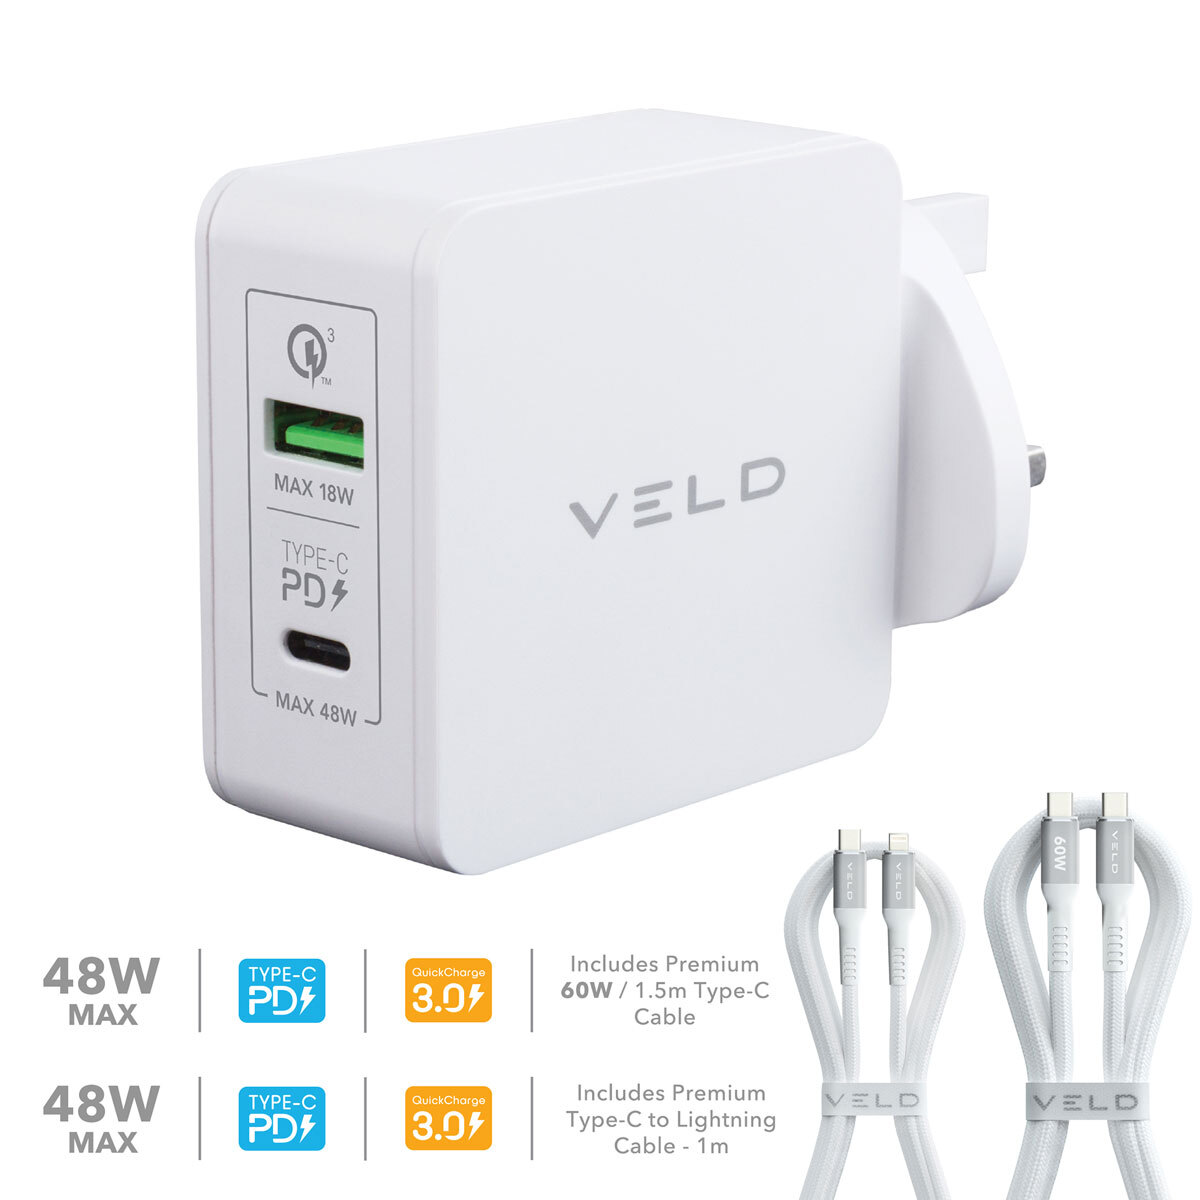 VELD Super-Fast Max 48W 2 Port Wall Charger with Lightning or Type-C Cable